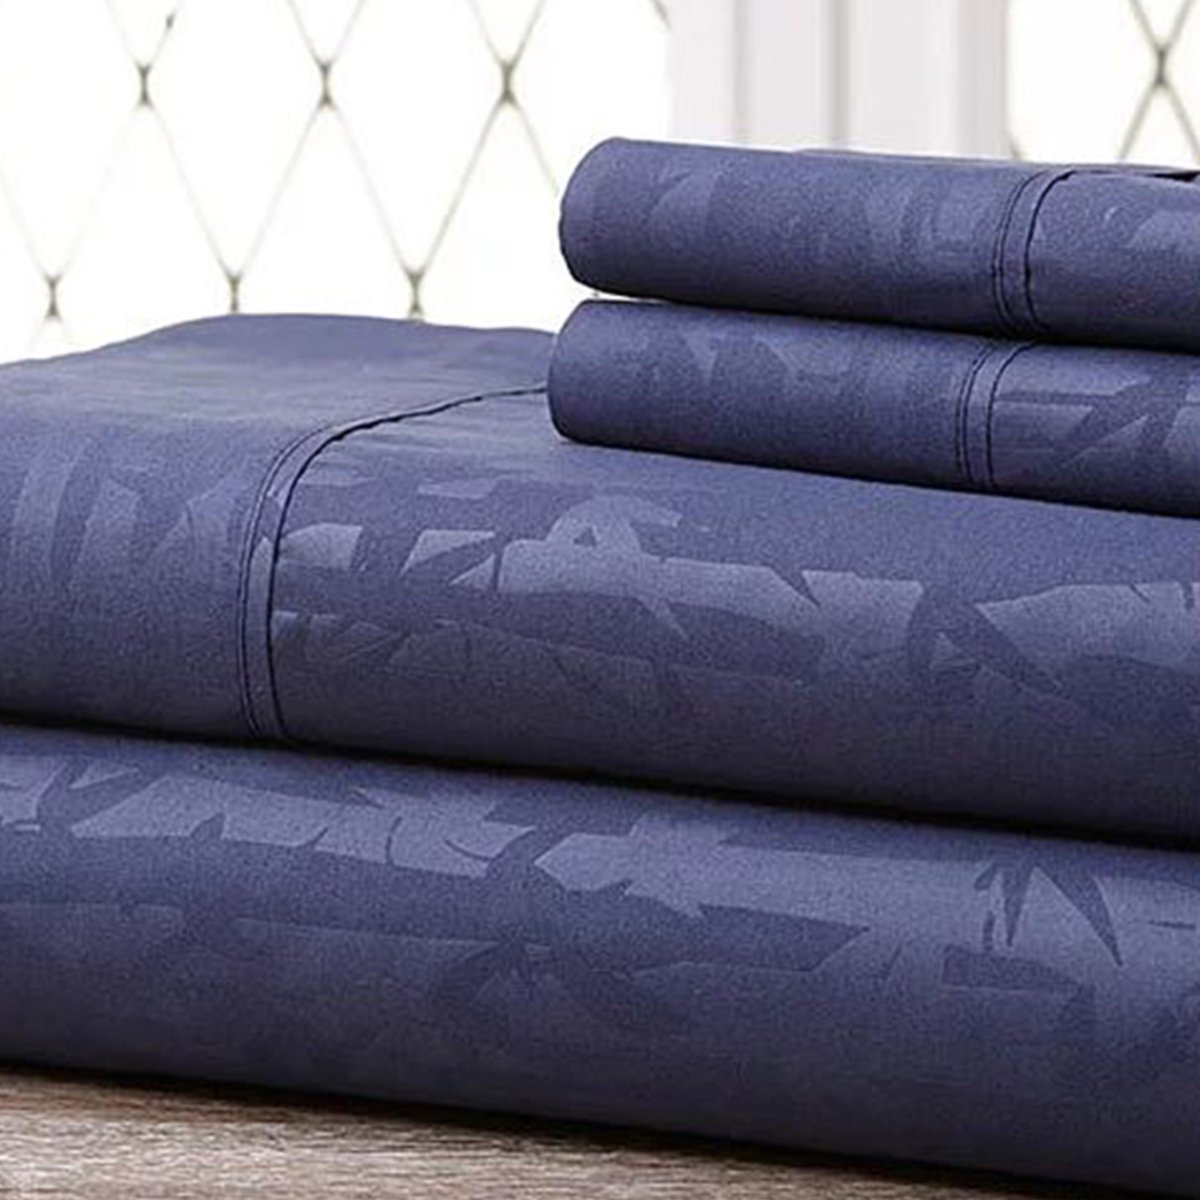 Super-soft 1600 Series Bamboo Embossed Bed Sheet, Navy - Queen, 4 Piece